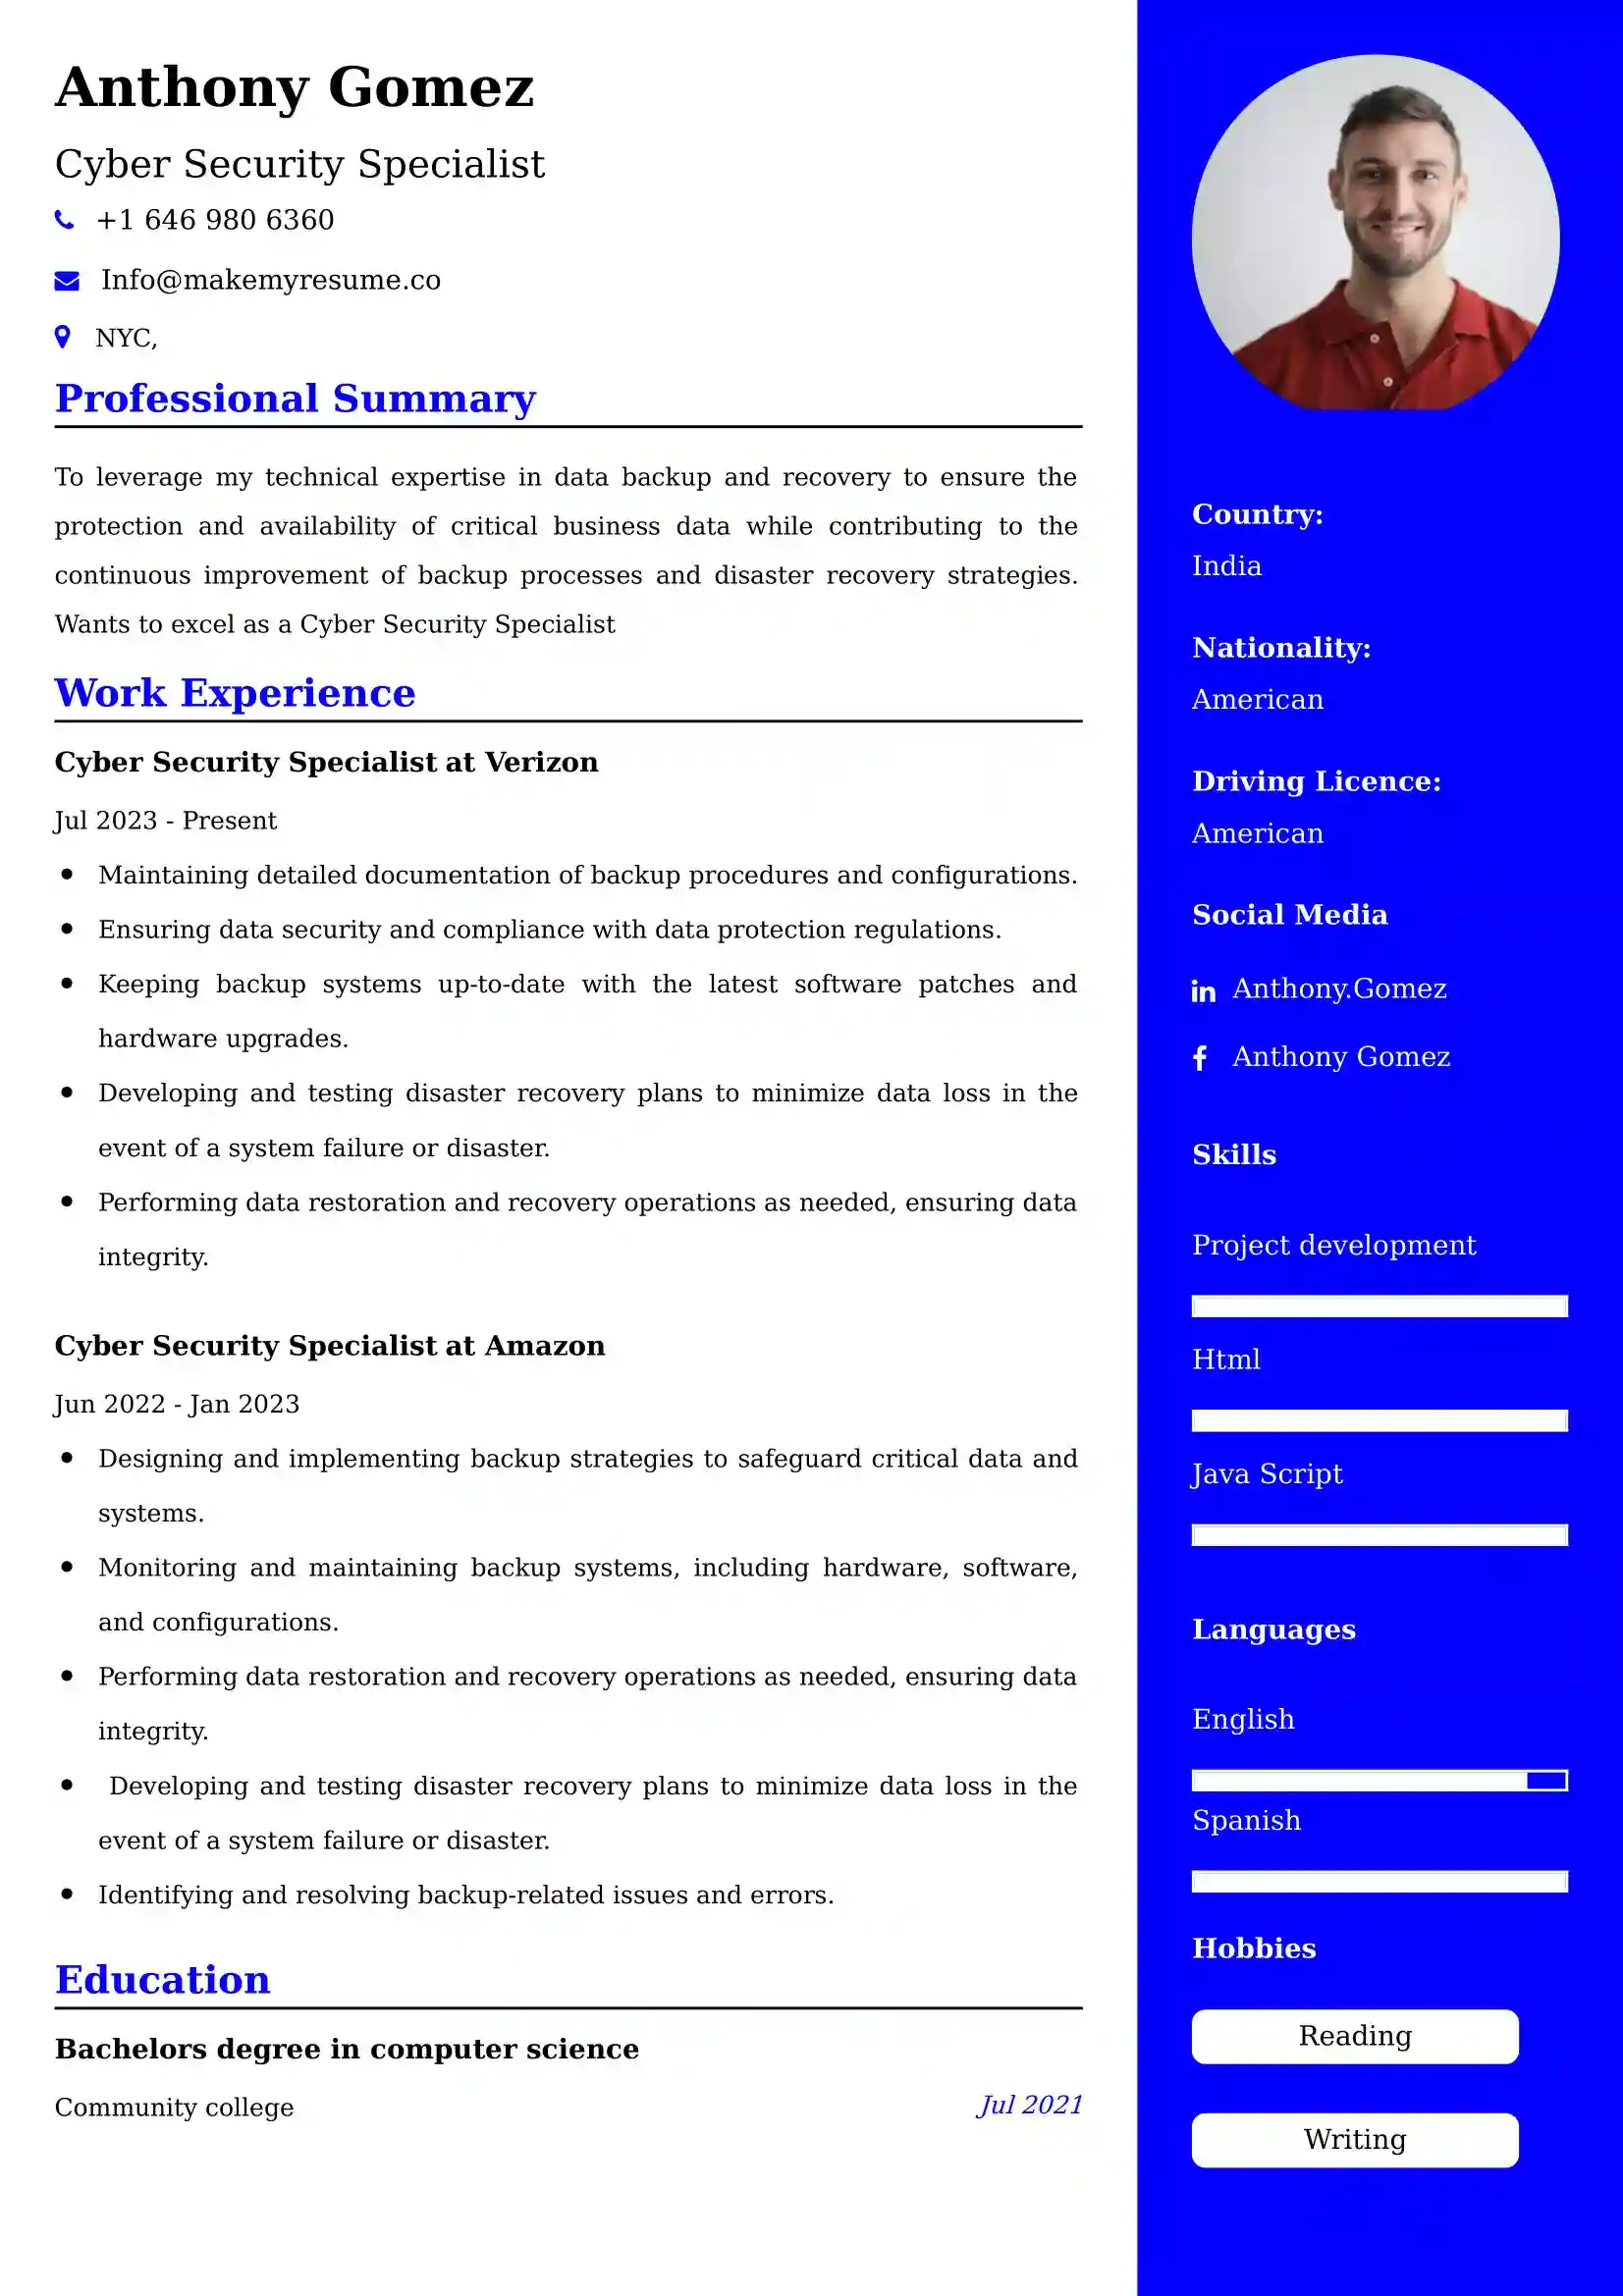 Cyber Security Specialist CV Examples - US Format